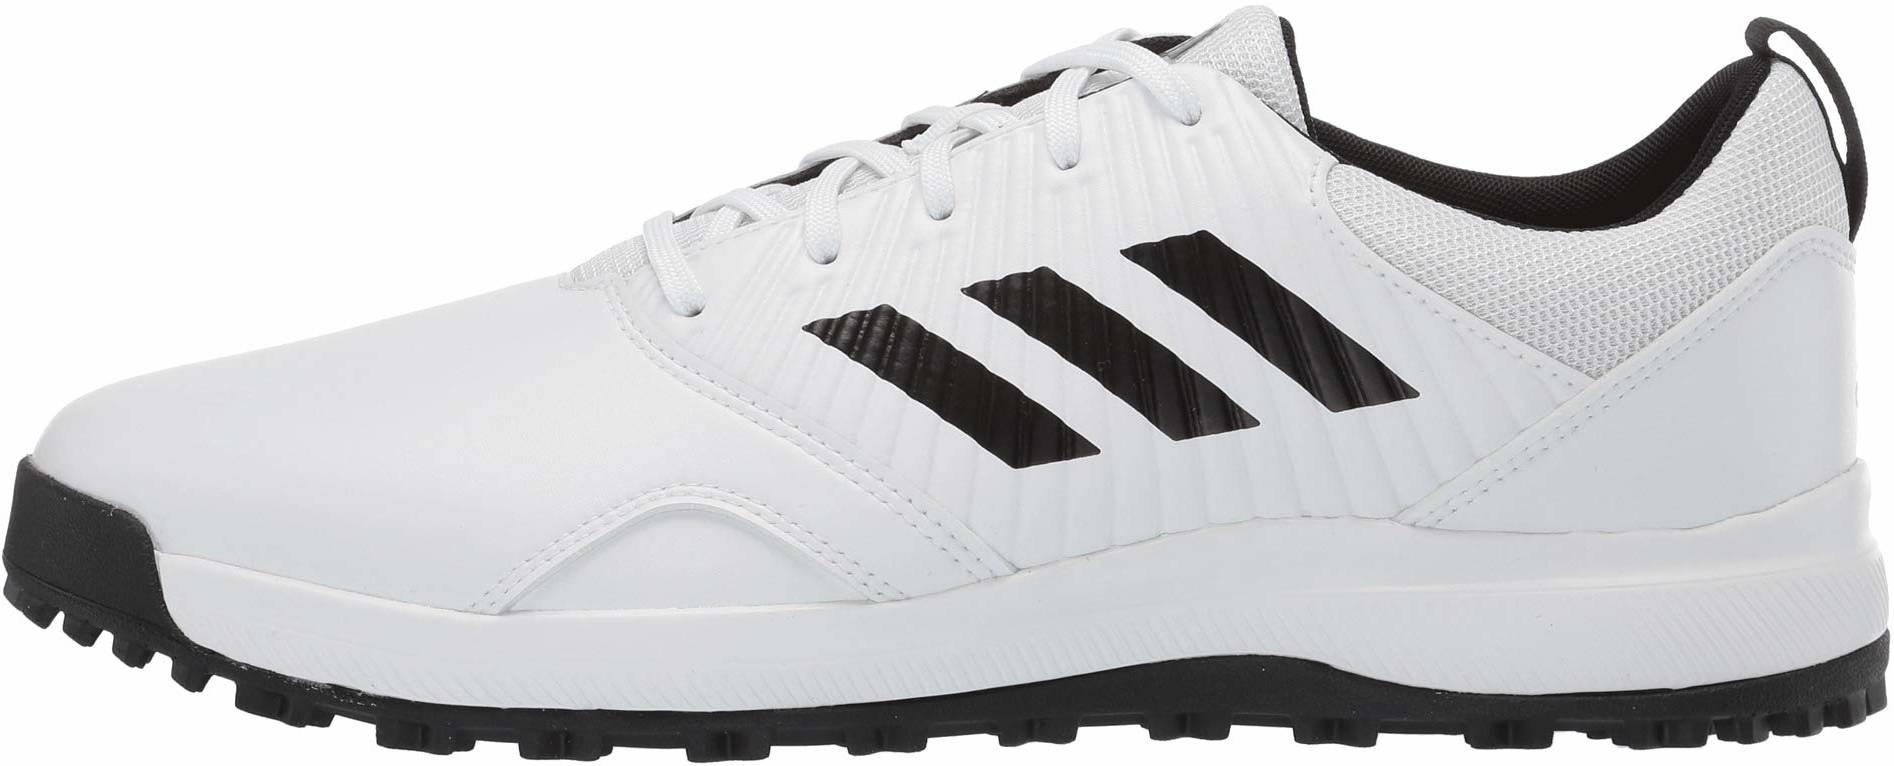 adidas traxion shoes price